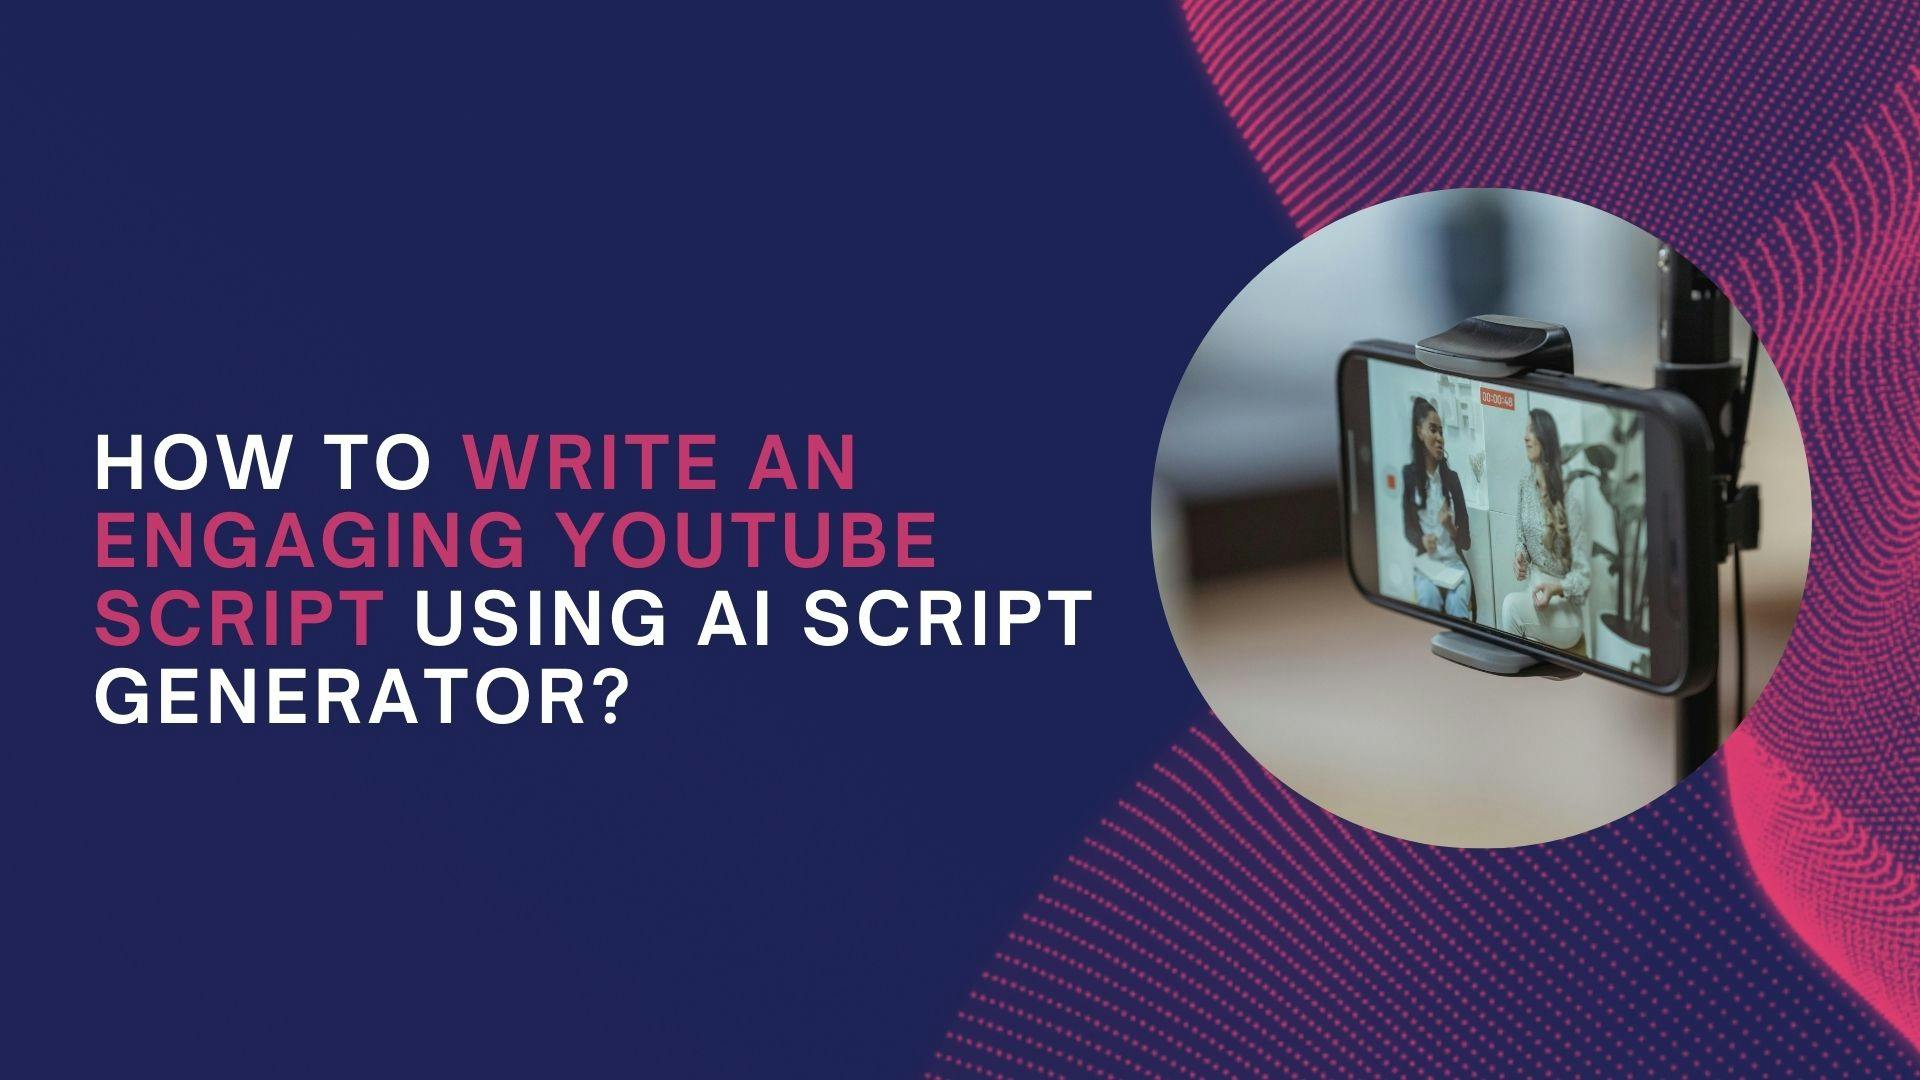 How To Write an Engaging YouTube Script Using AI Script Generator? - Puppetry